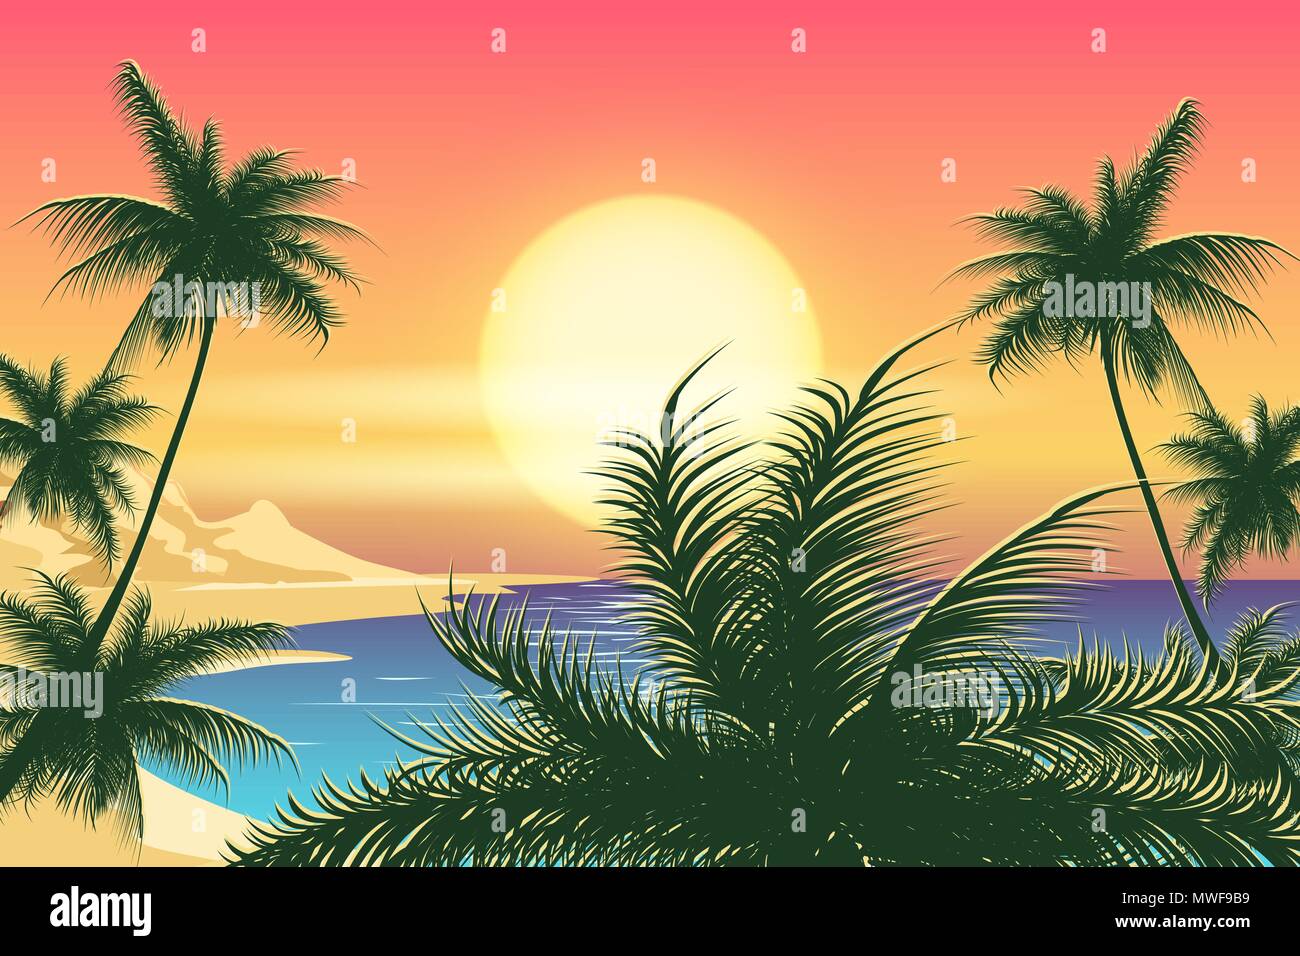 Tropical seascape with palm trees on island coastline at sunset. Vector illustration. Stock Vector